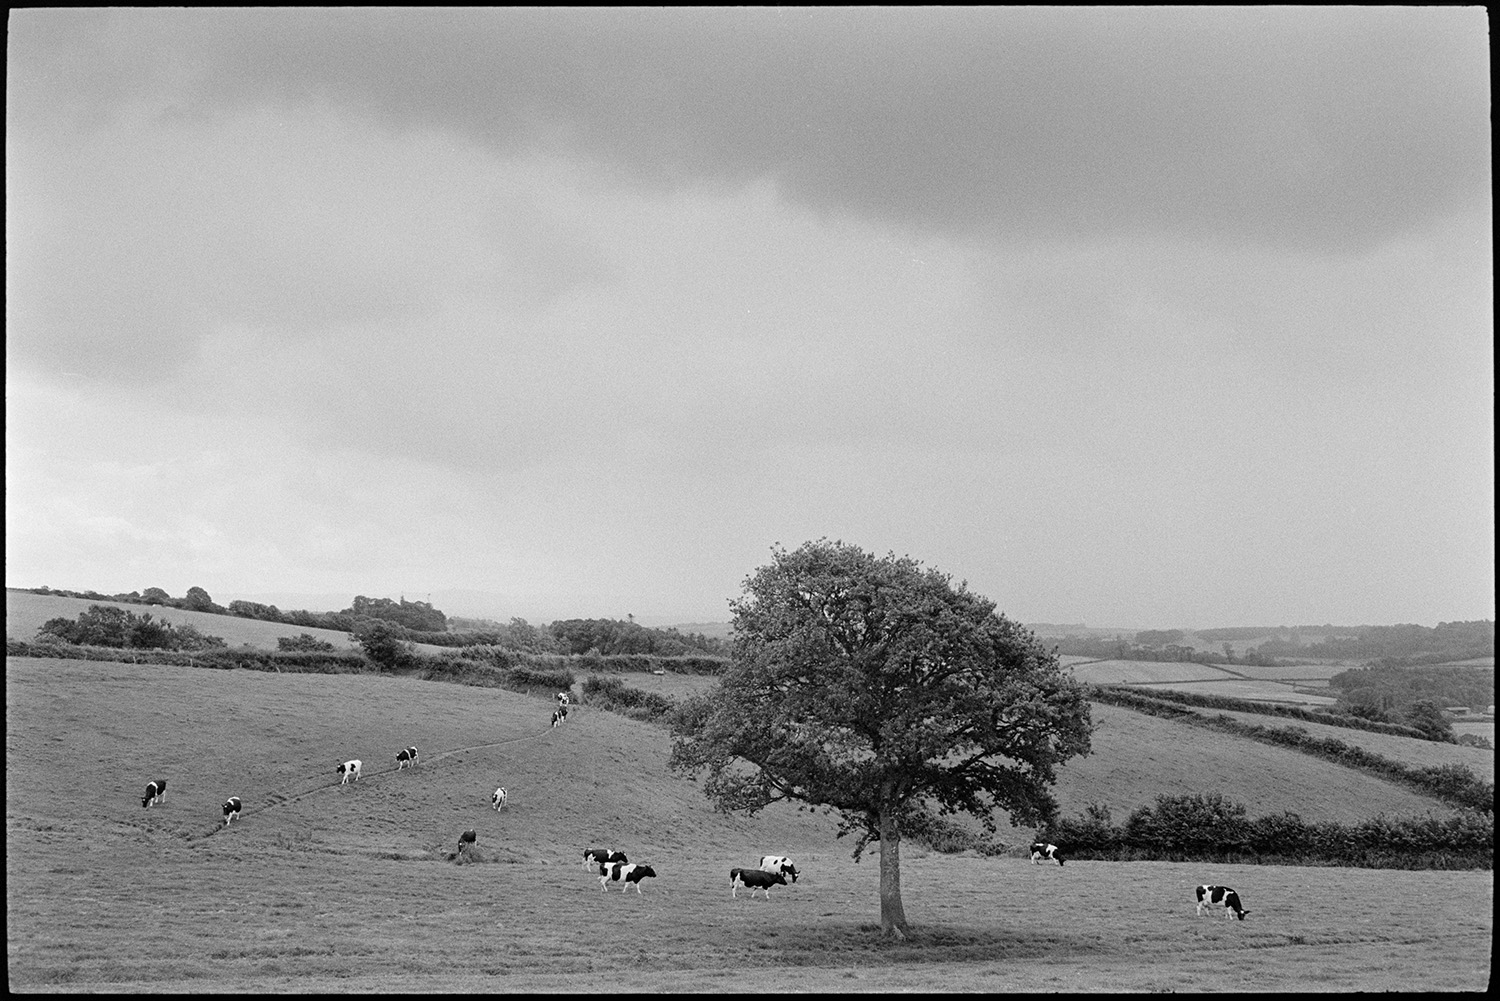 Landscape with tree and cows.
[Landscape with a single tree in a field with grazing cows, at South Harepath, Beaford.]